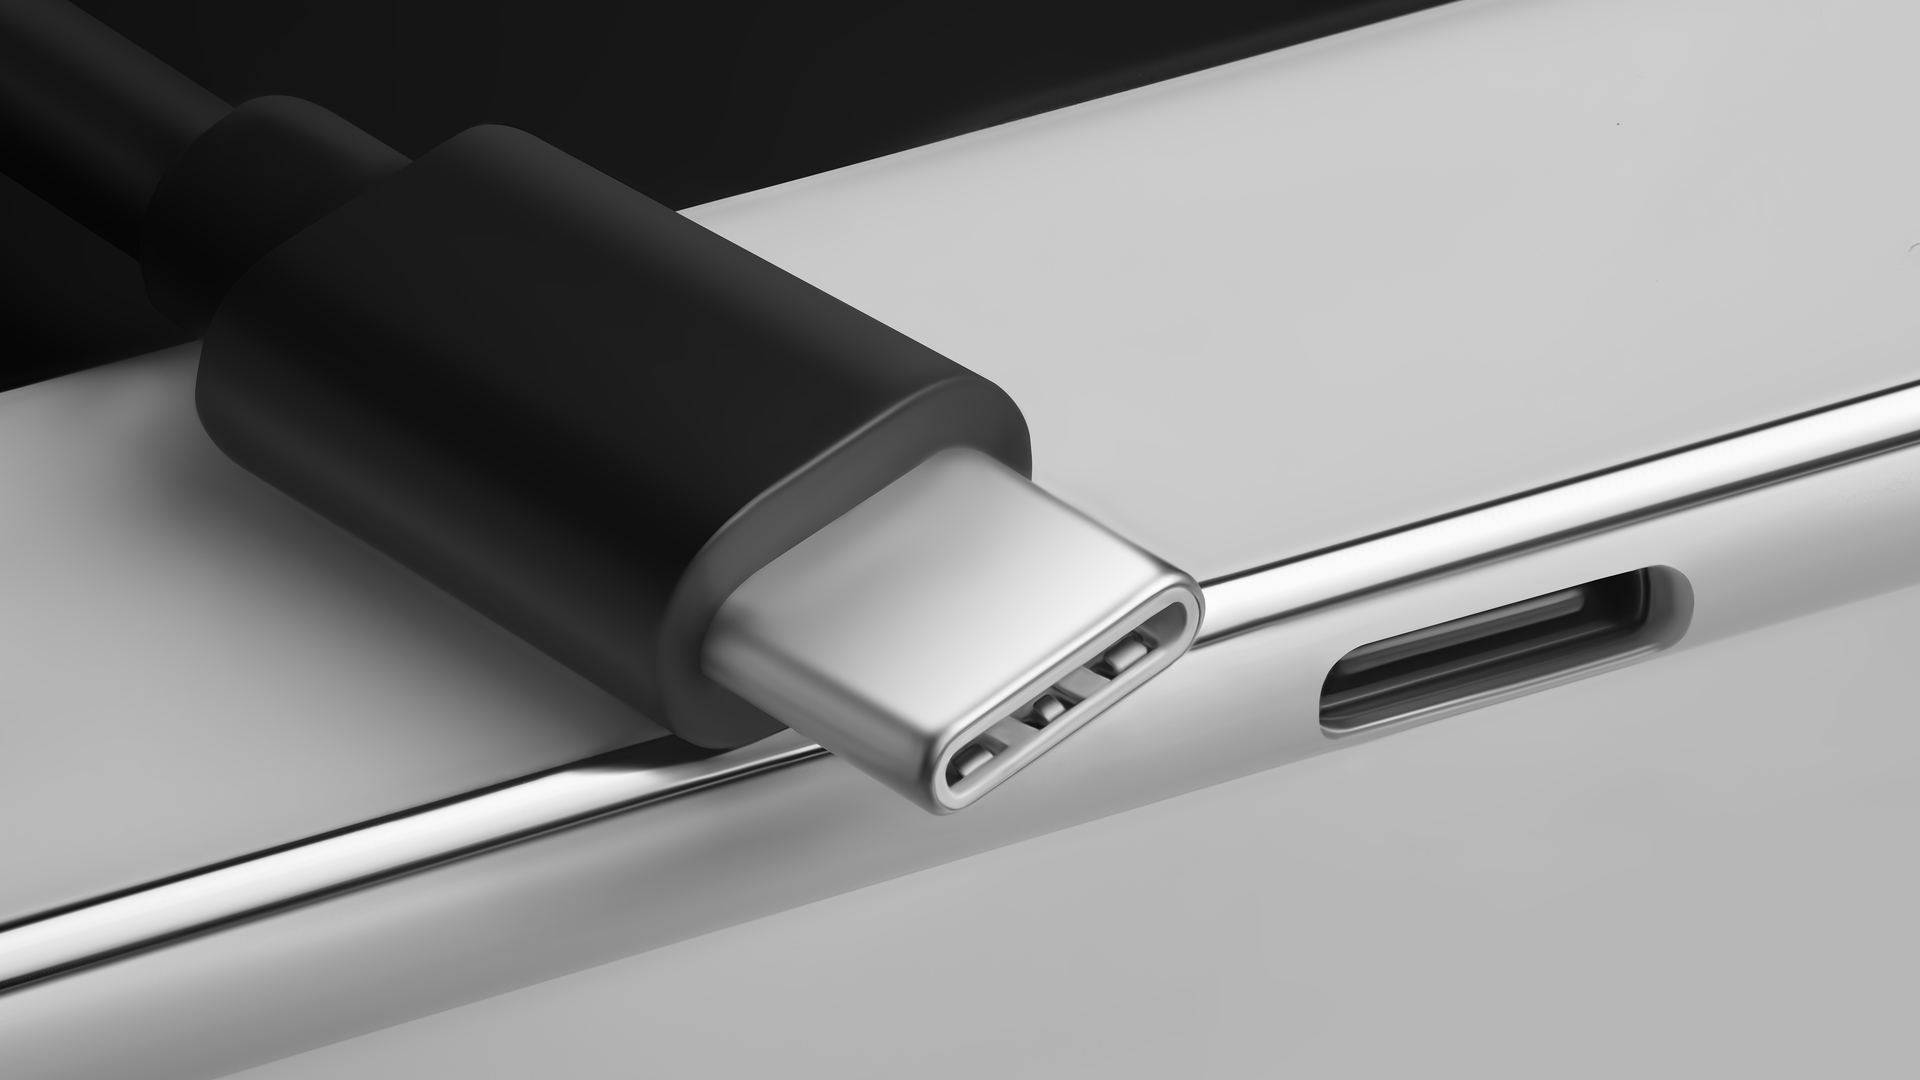 USB-C 2.1 could charge our laptops and smartphones in a flash